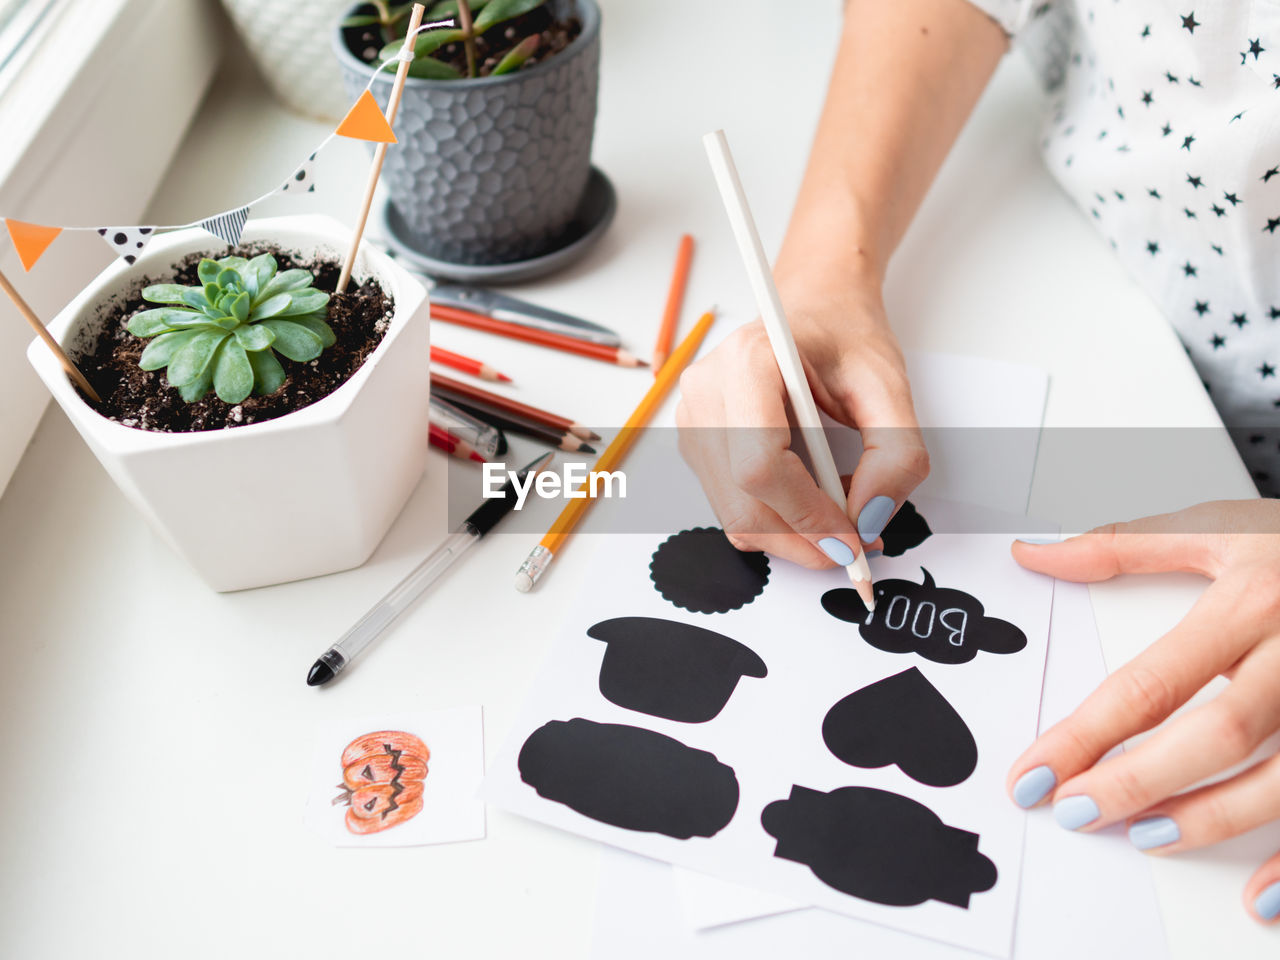 Woman writes boo on decorative black stickers for flower pots. handmade halloween decorations.